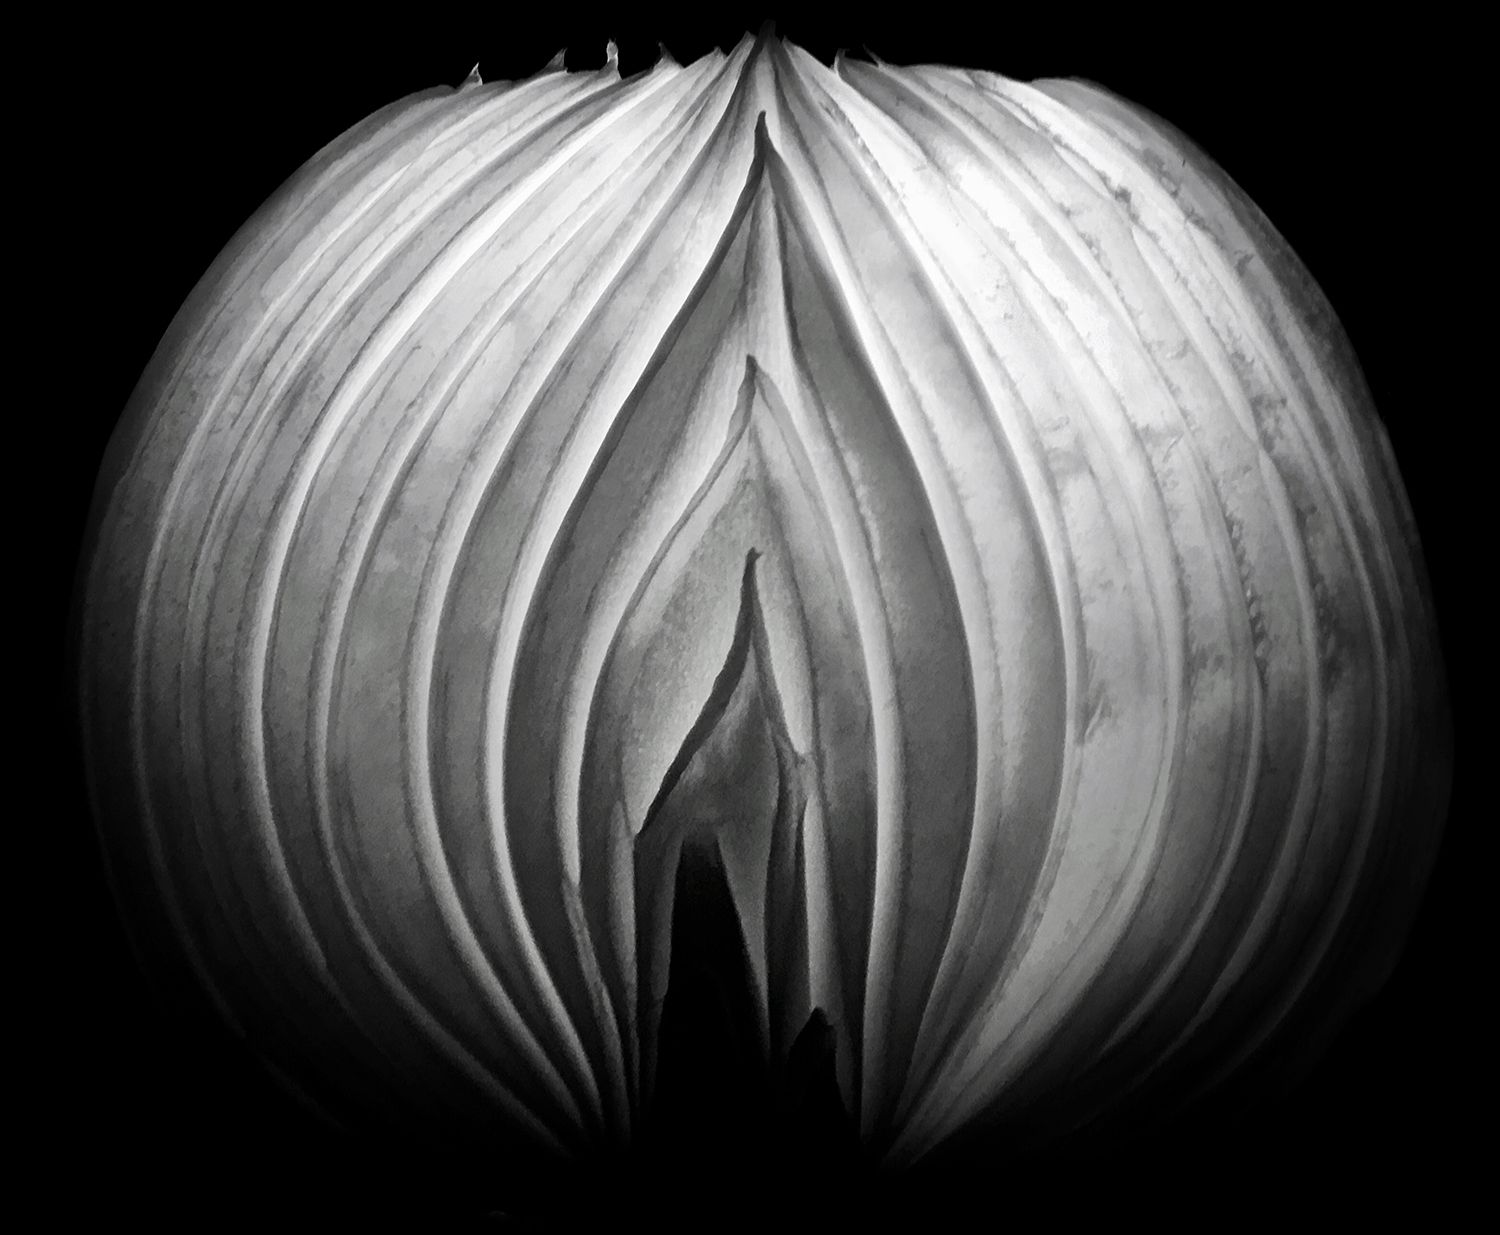 Tiny Immensity #33 - Eternal Flame of the Aging Onion in the Time of Covid ©2020 L. Aviva Diamond